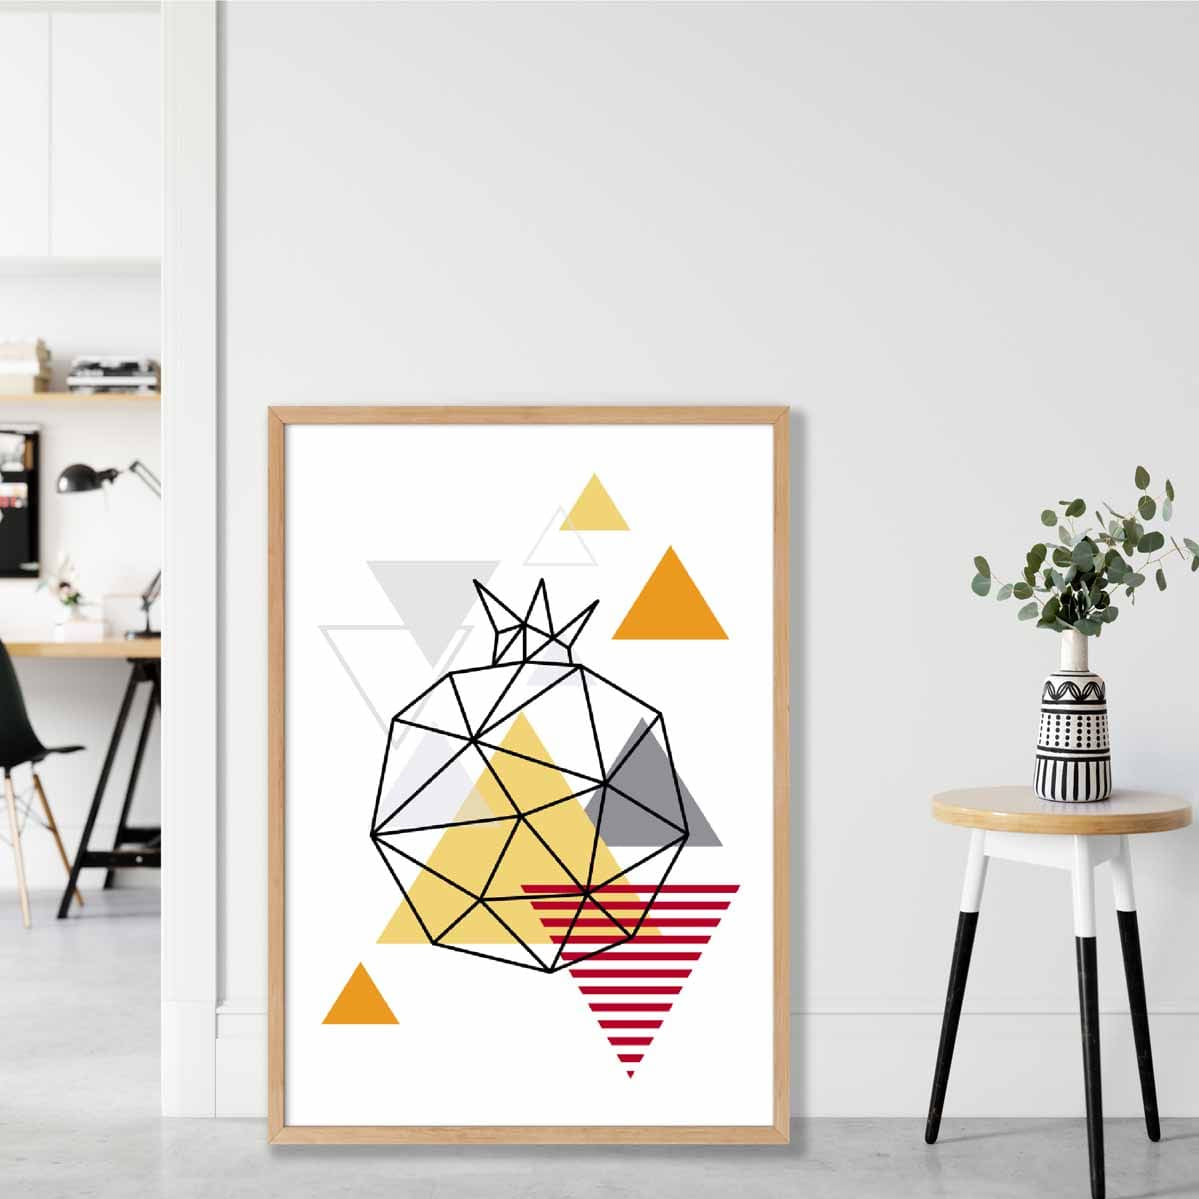 Geometric Fruit Line art Poster of Pomegranate in Orange Red Yellow